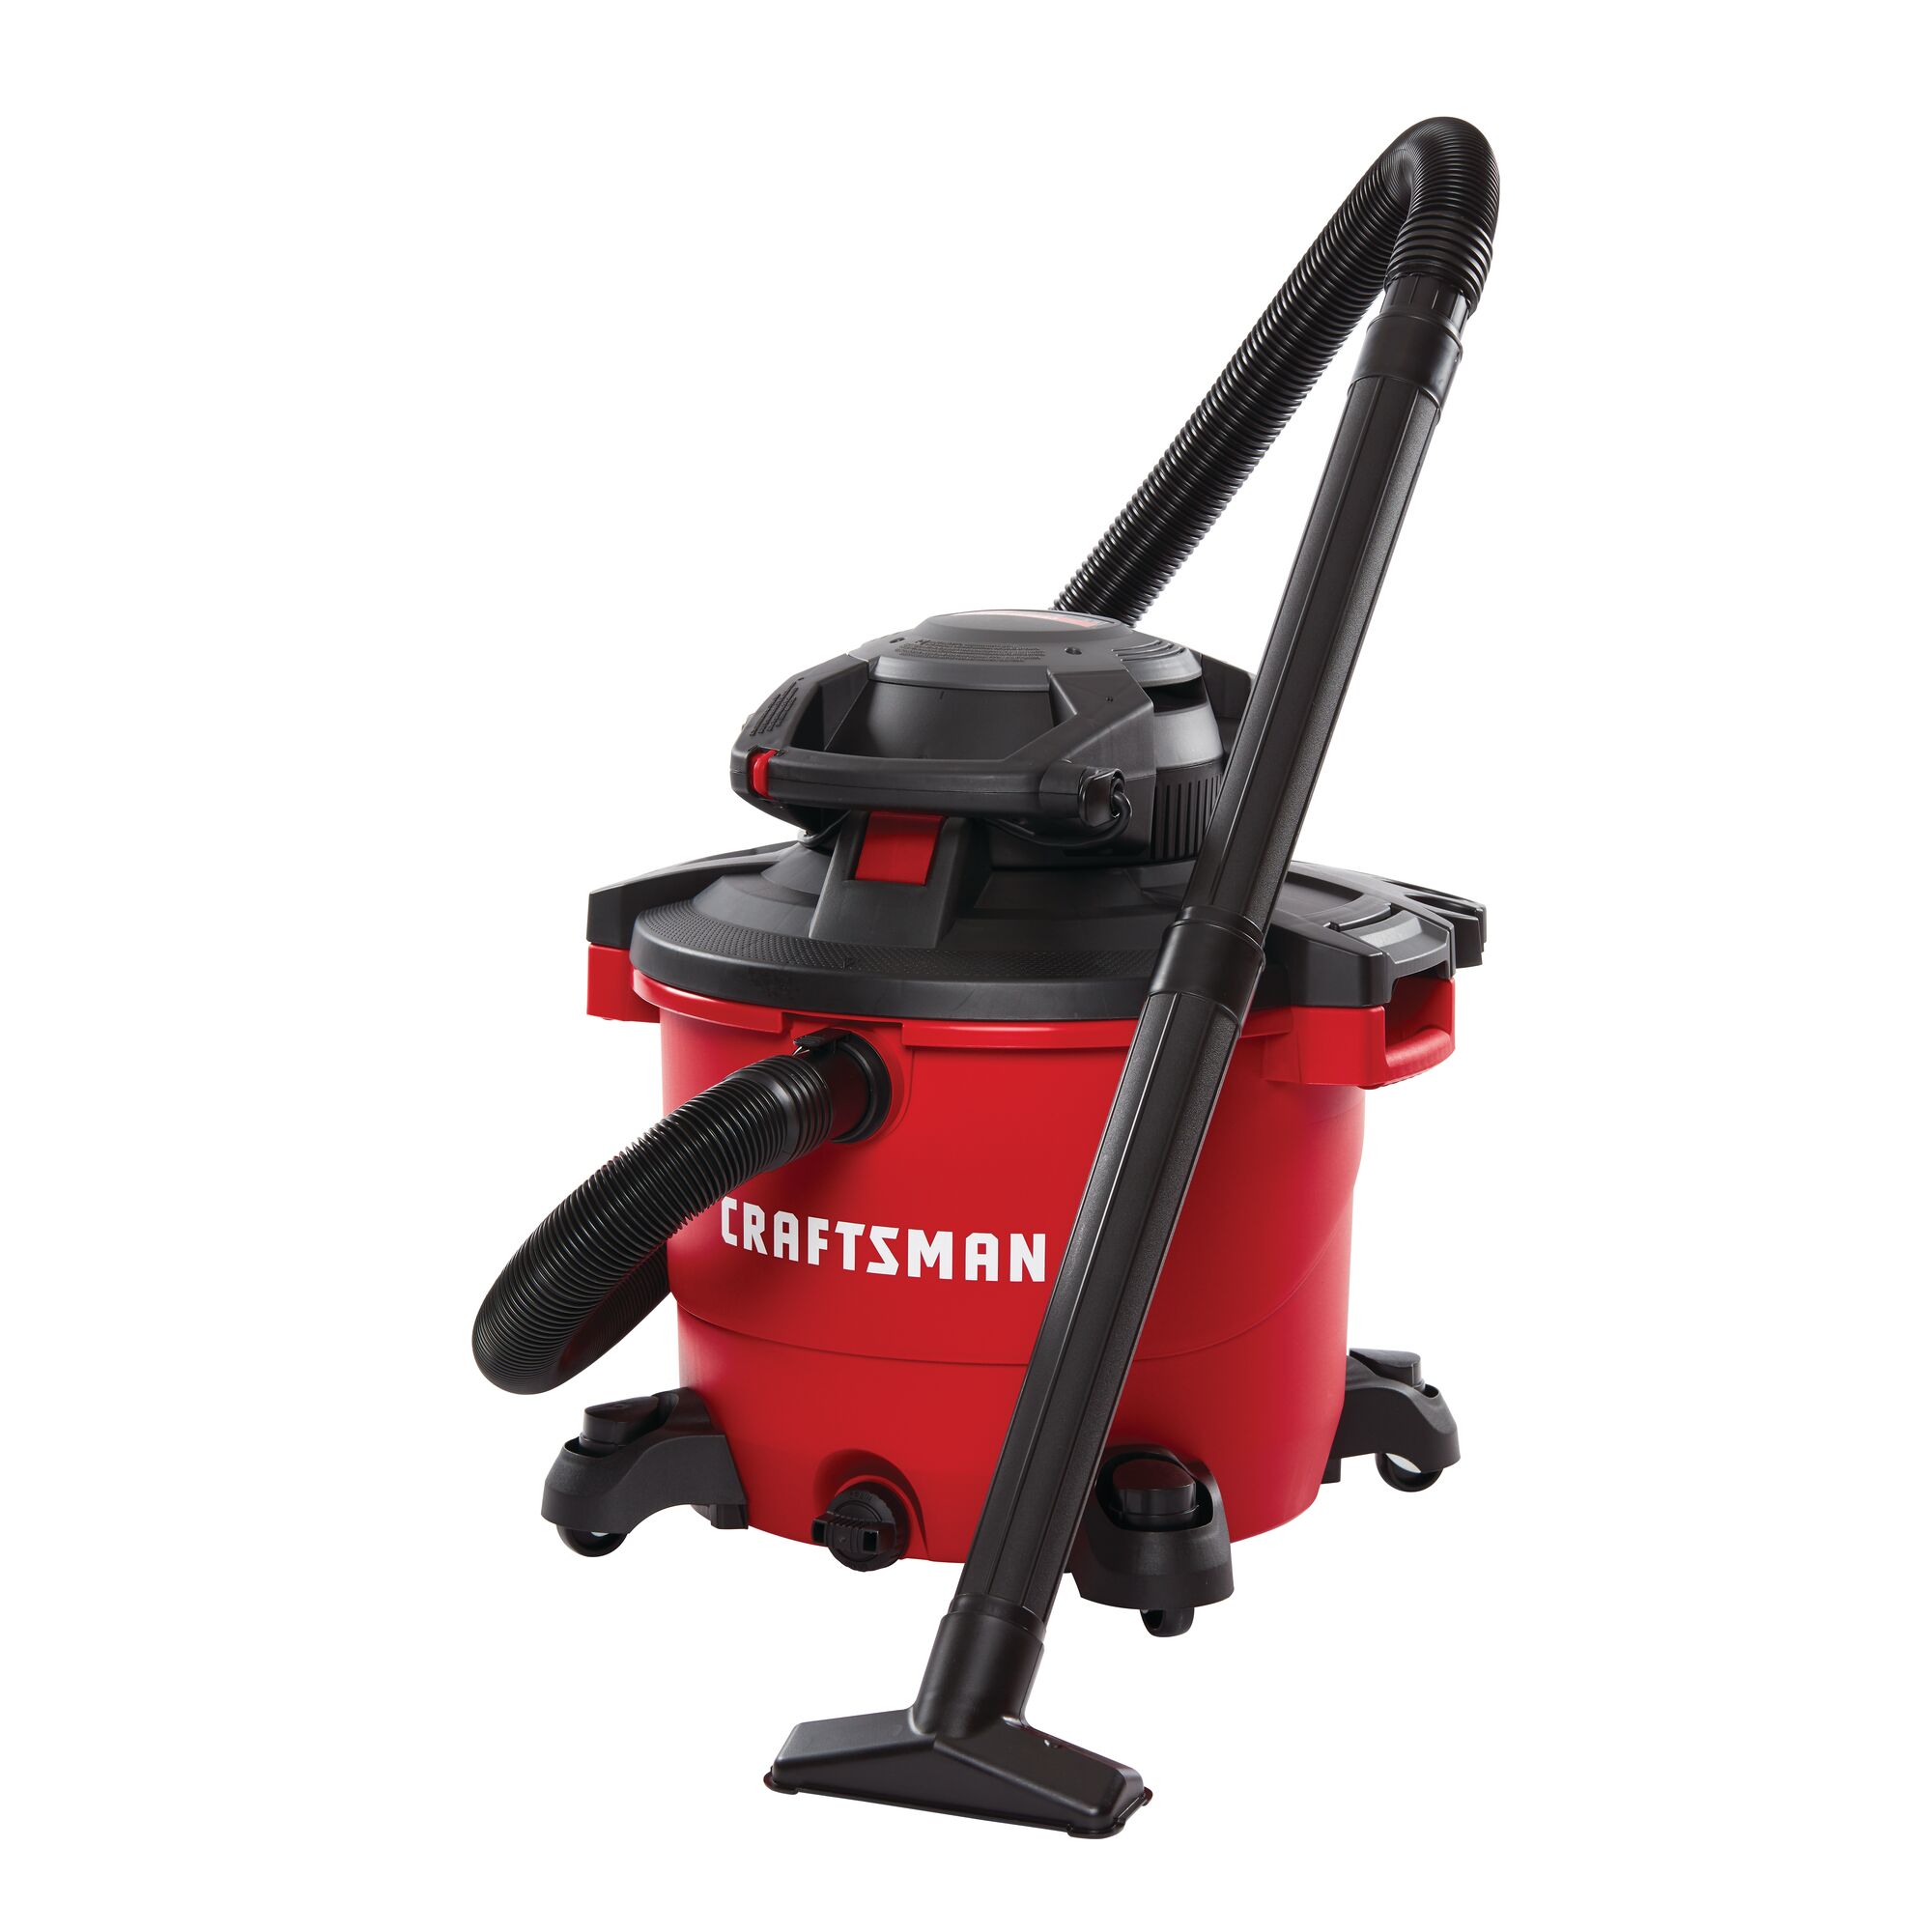 View of CRAFTSMAN Vacuums: Wet/Dry Shop Vac on white background